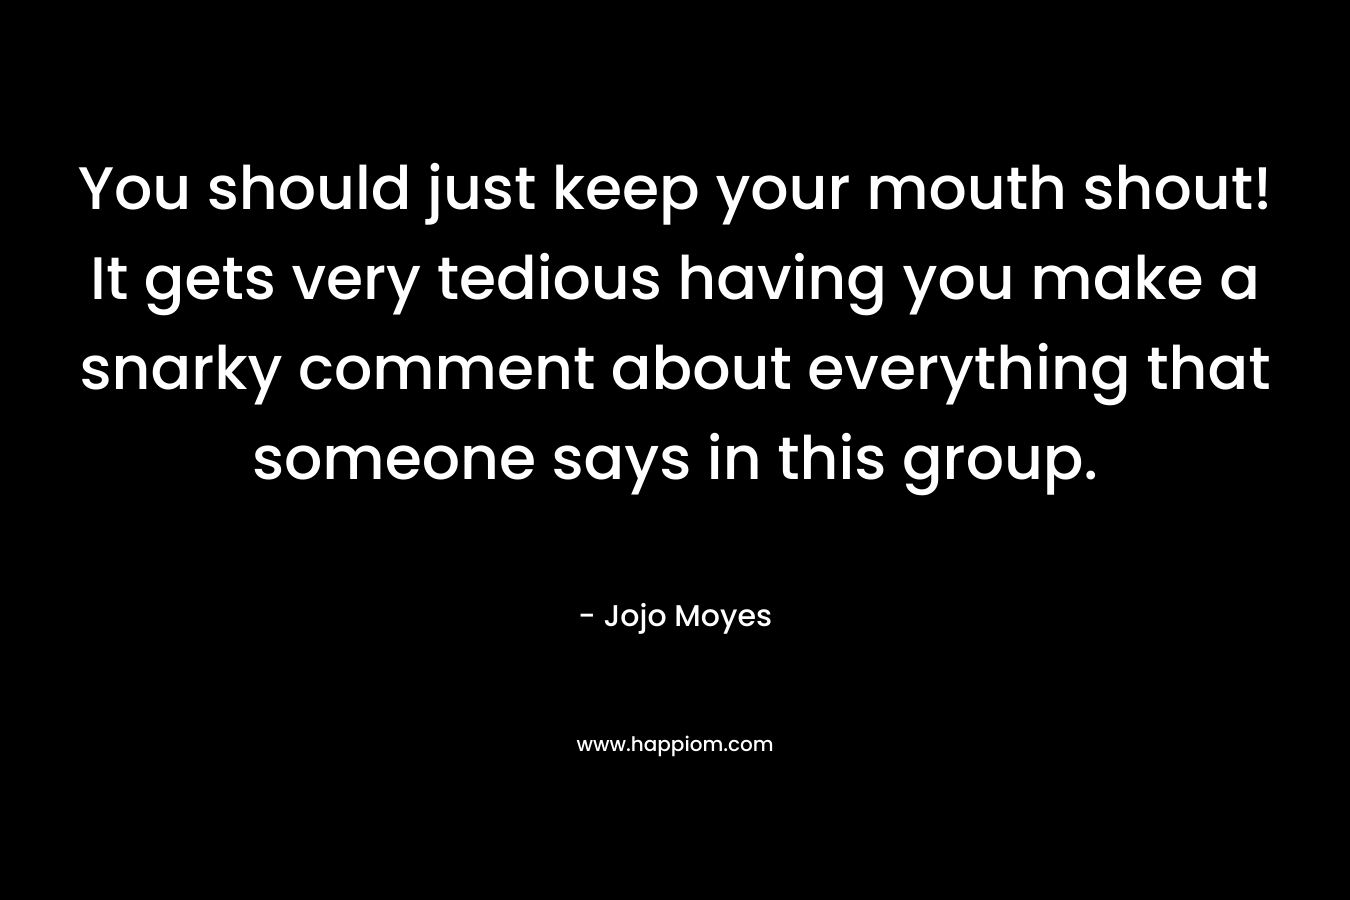 You should just keep your mouth shout! It gets very tedious having you make a snarky comment about everything that someone says in this group. – Jojo Moyes